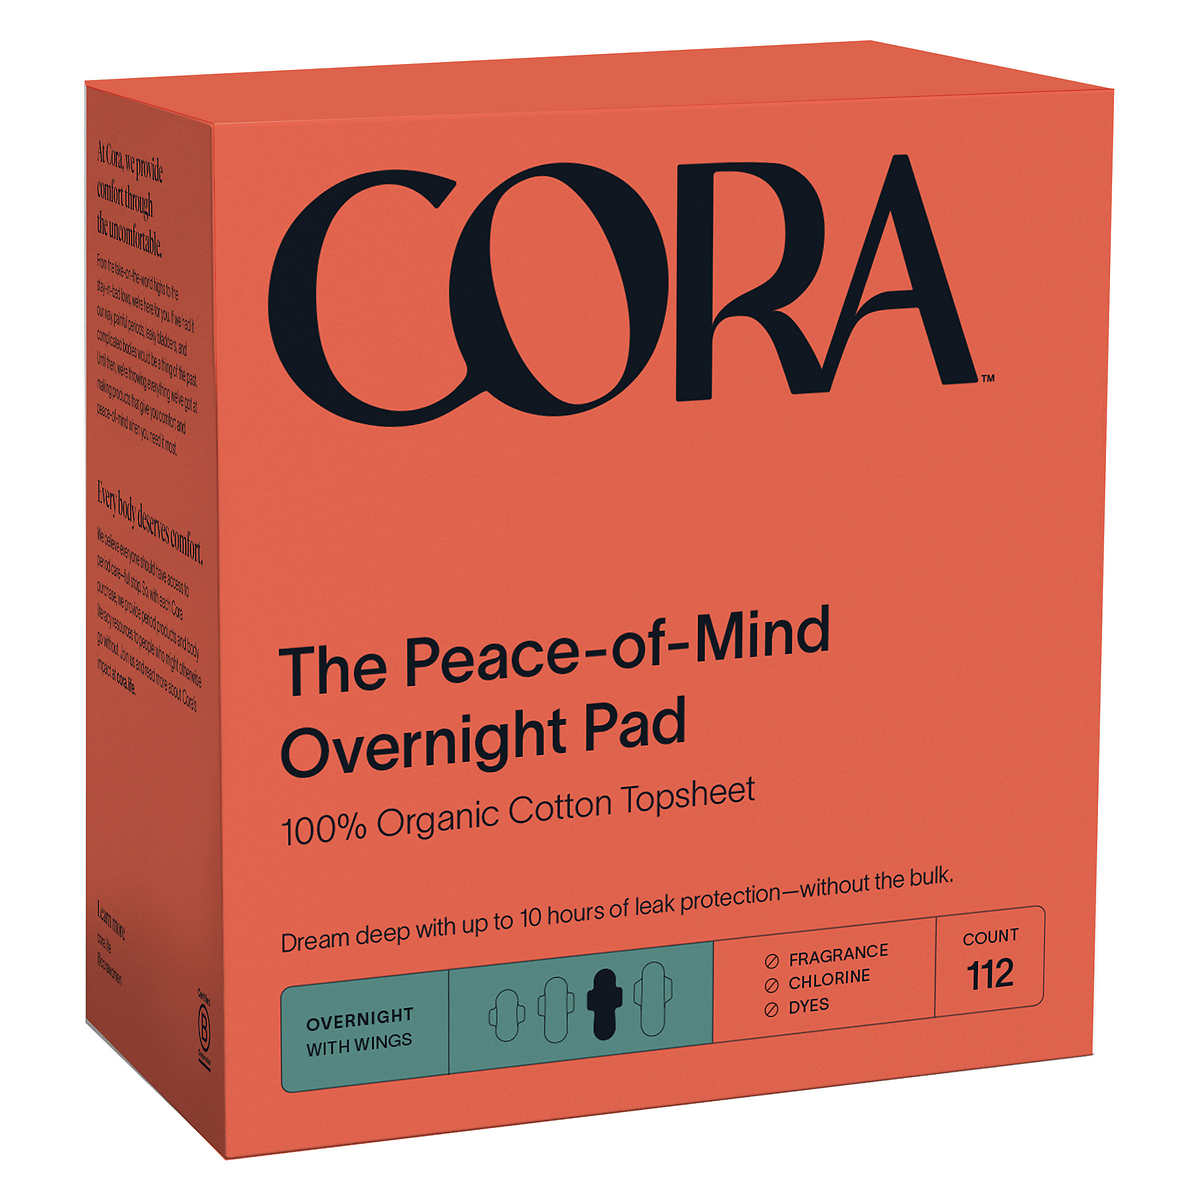 Cora The Peace-of-Mind Overnight Pad, 112ct